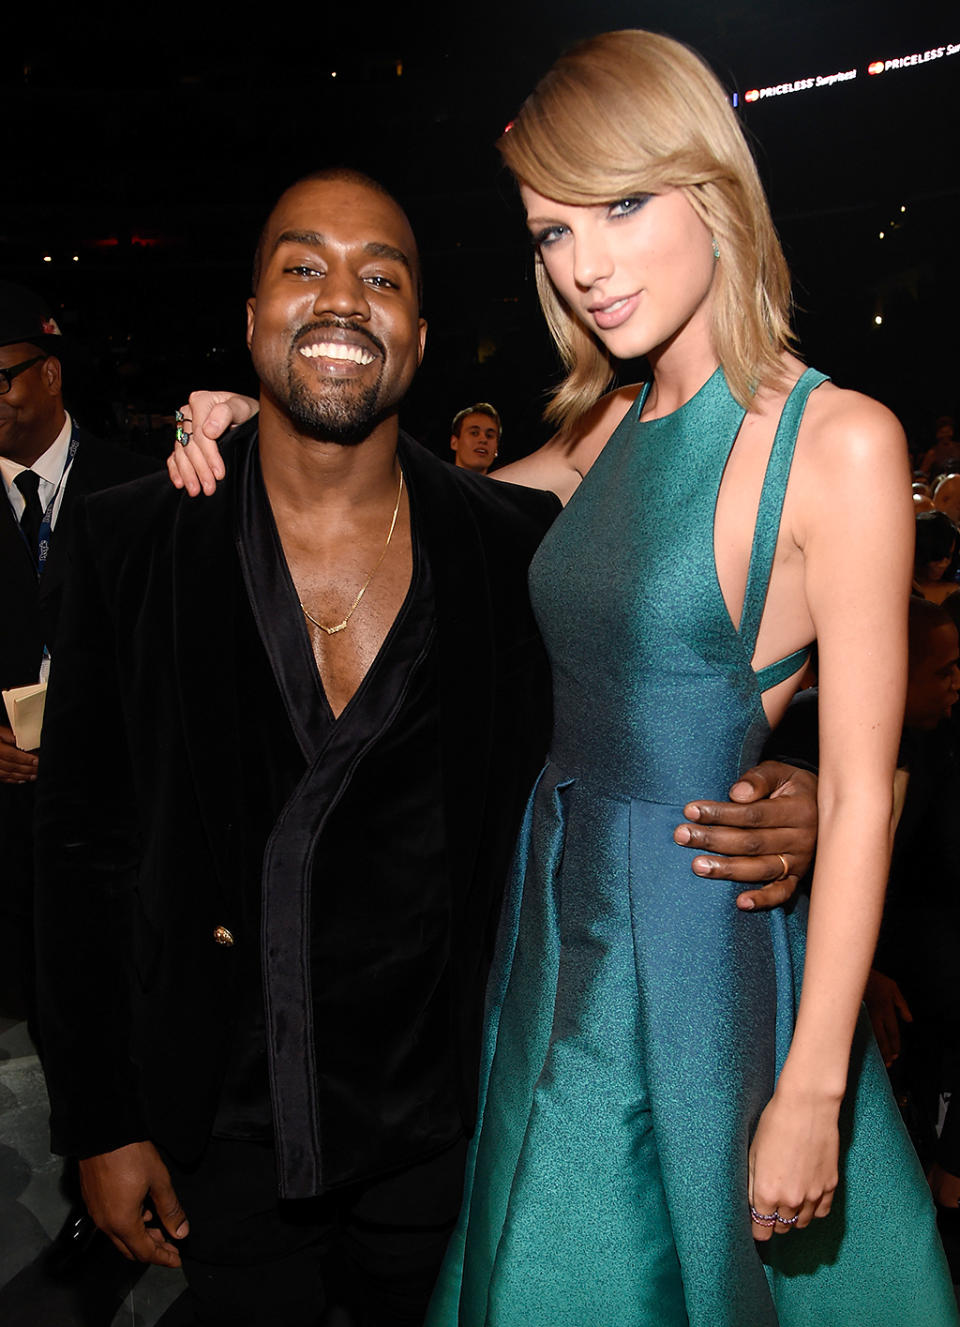 11. Taylor Swift faces off with Kimye over ‘Famous’ lyric